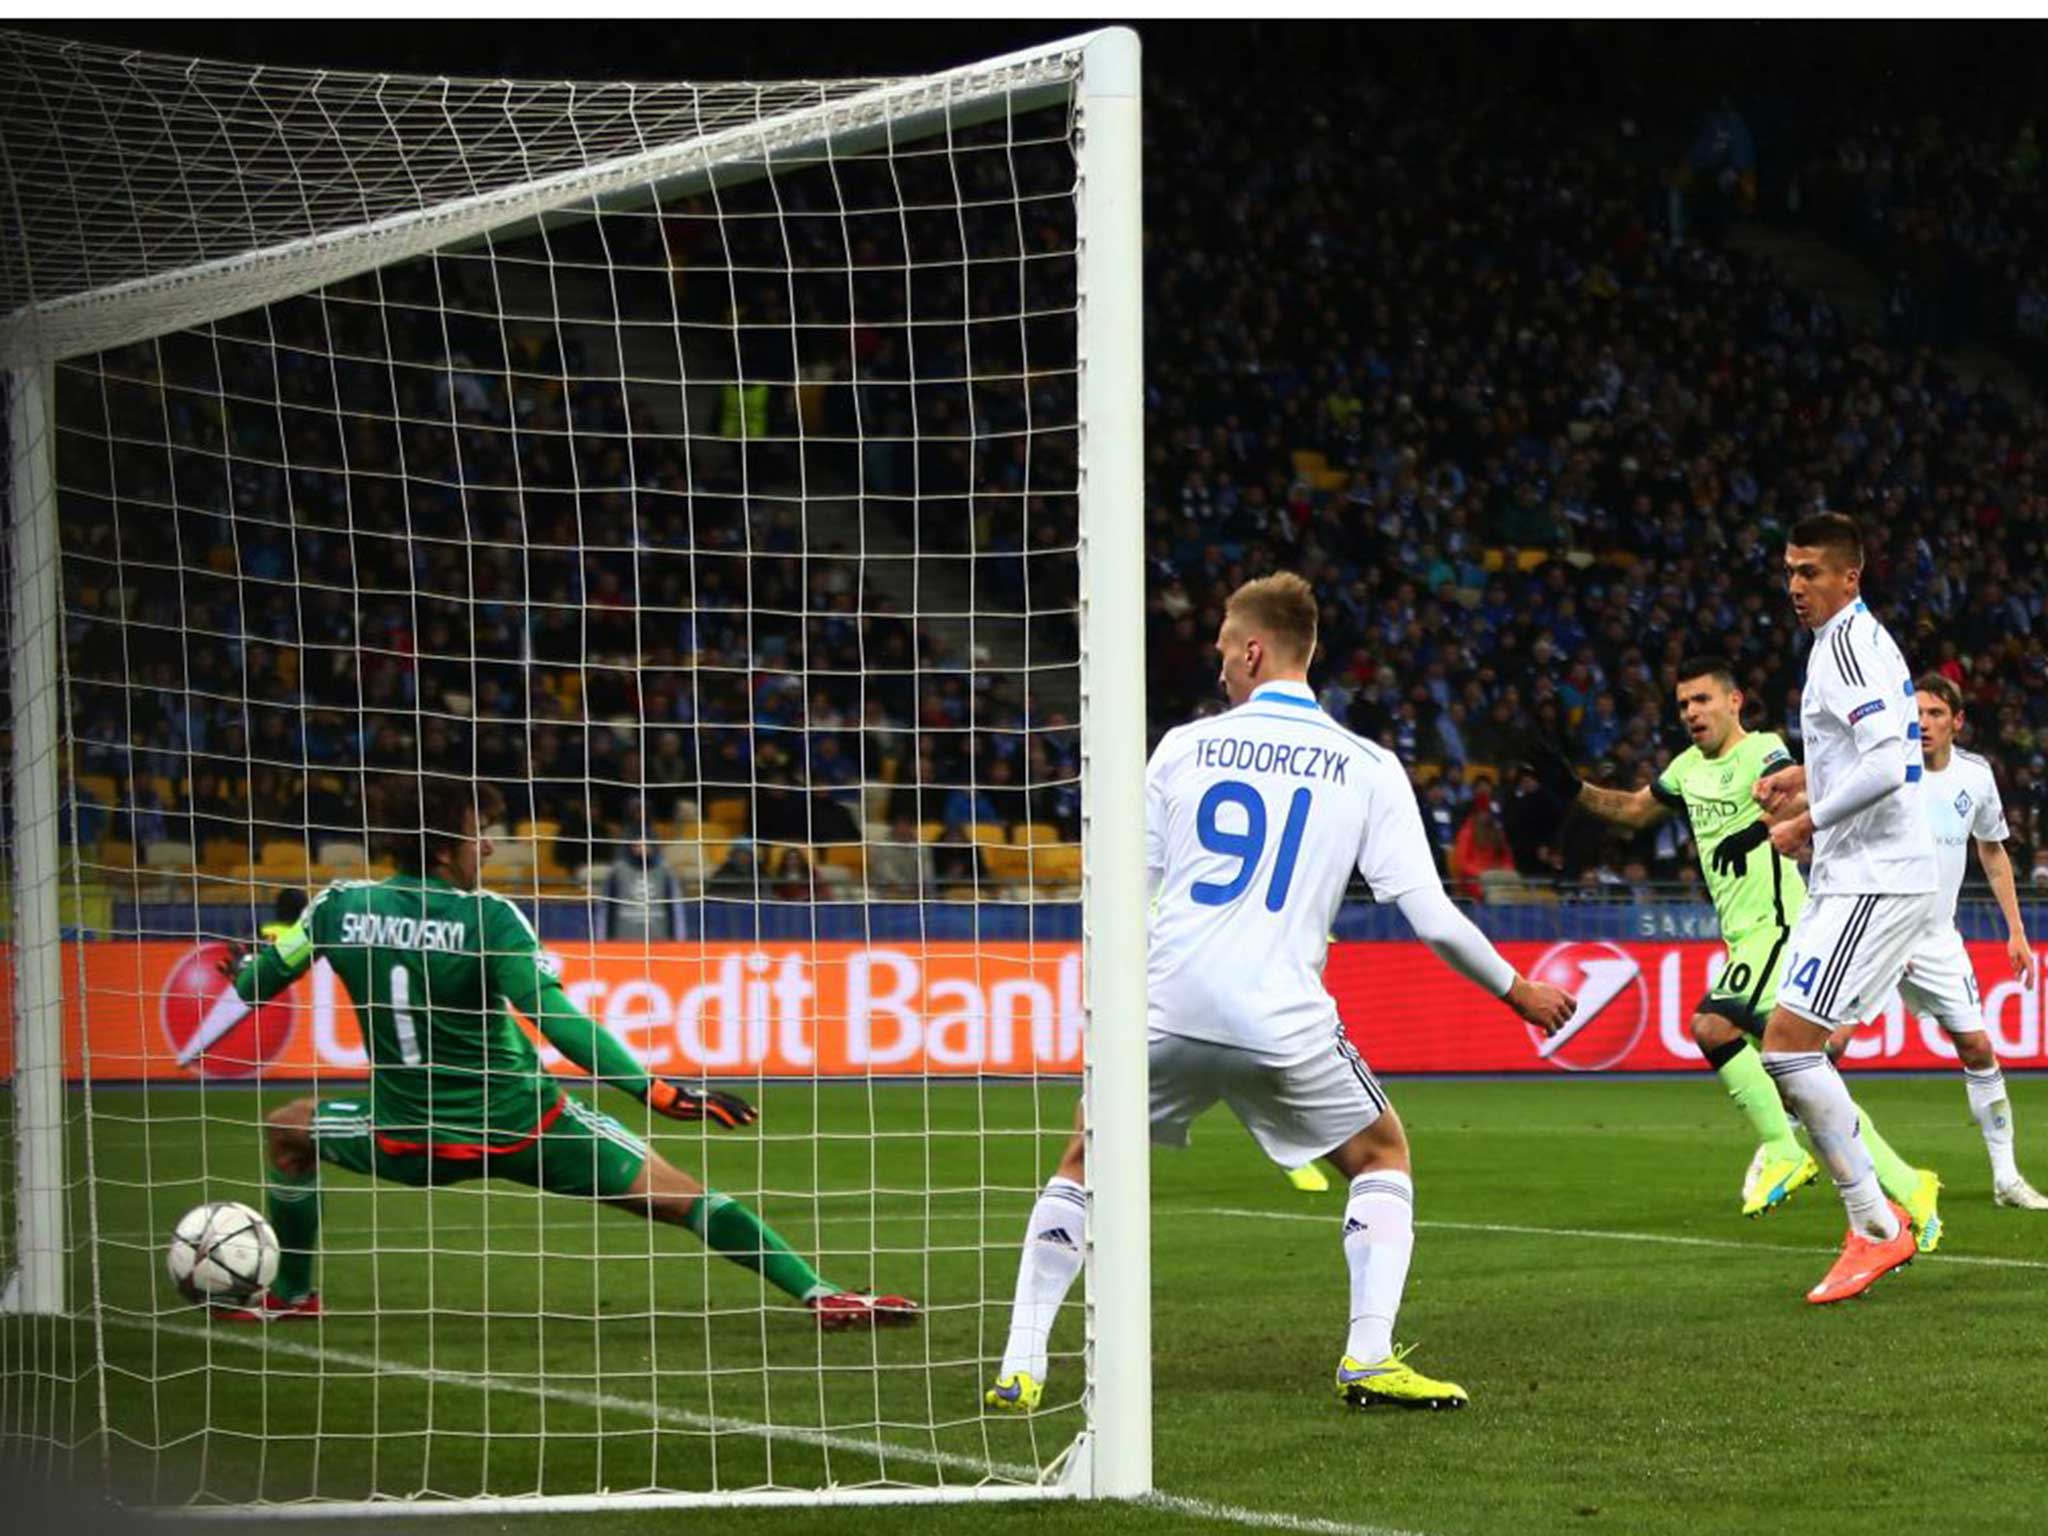 Aguero (third from right) reacts fastest to score Manchester City’s first goal in Kiev